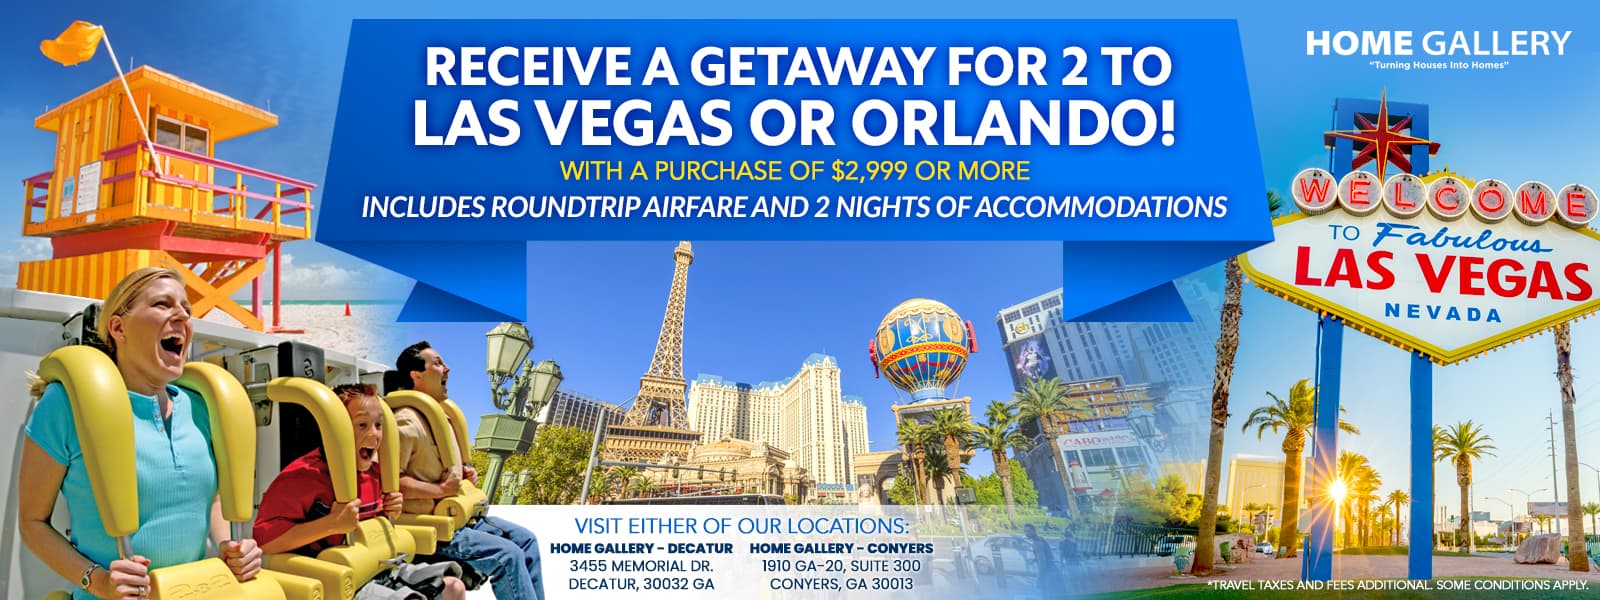 Receive a getaway for two to Las Vegas or Orlando! *with a purchase of 2,999 or more. Includes roundtrip airfare and 2 nights of accommodations